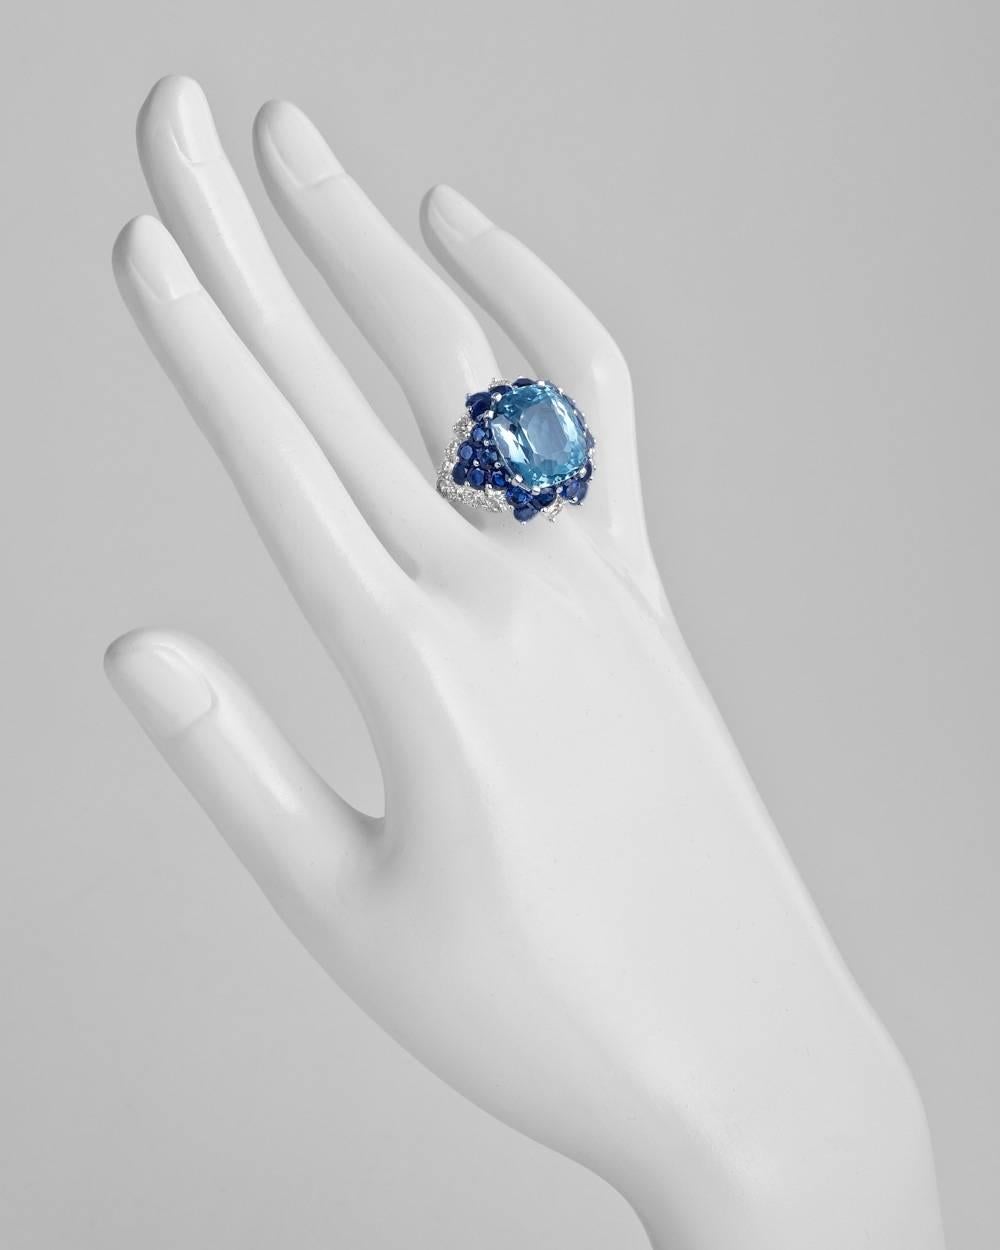 Gem-set cocktail ring, centering a cushion-cut aquamarine weighing approximately 9.74 carats, accented by a circular-cut sapphire and diamond surround of a flower petal motif, mounted in platinum. Sapphires weighing approximately 4.09 total carats